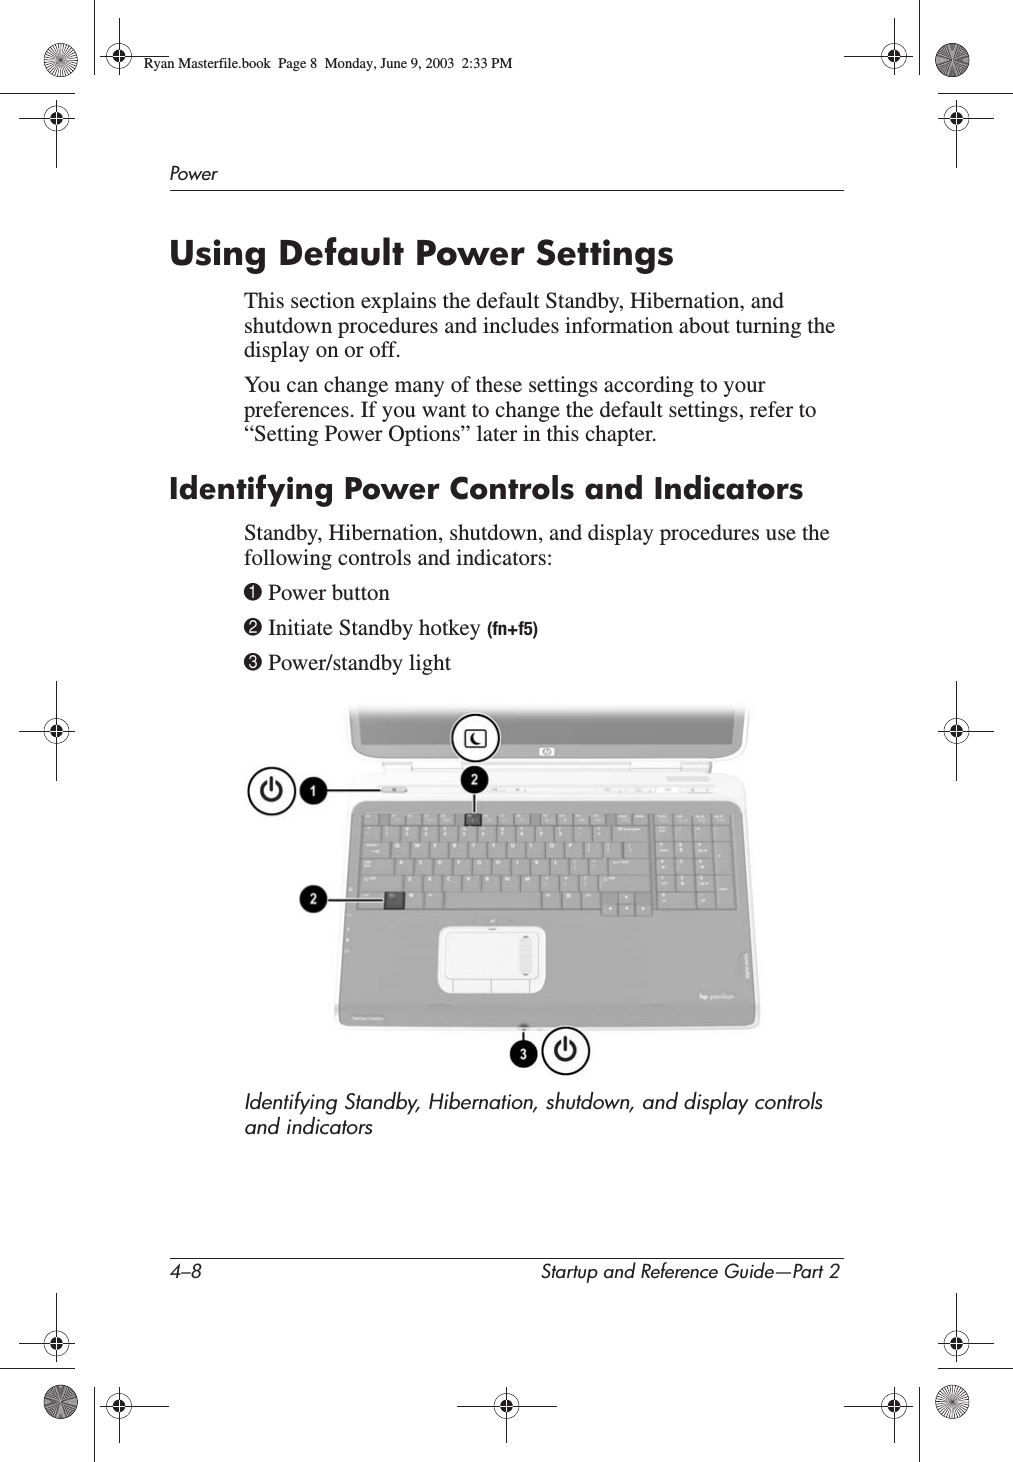 4–8 Startup and Reference Guide—Part 2PowerUsing Default Power SettingsThis section explains the default Standby, Hibernation, and shutdown procedures and includes information about turning the display on or off.You can change many of these settings according to your preferences. If you want to change the default settings, refer to “Setting Power Options” later in this chapter.Identifying Power Controls and IndicatorsStandby, Hibernation, shutdown, and display procedures use the following controls and indicators:1 Power button2 Initiate Standby hotkey (fn+f5)3 Power/standby lightIdentifying Standby, Hibernation, shutdown, and display controls and indicatorsRyan Masterfile.book  Page 8  Monday, June 9, 2003  2:33 PM